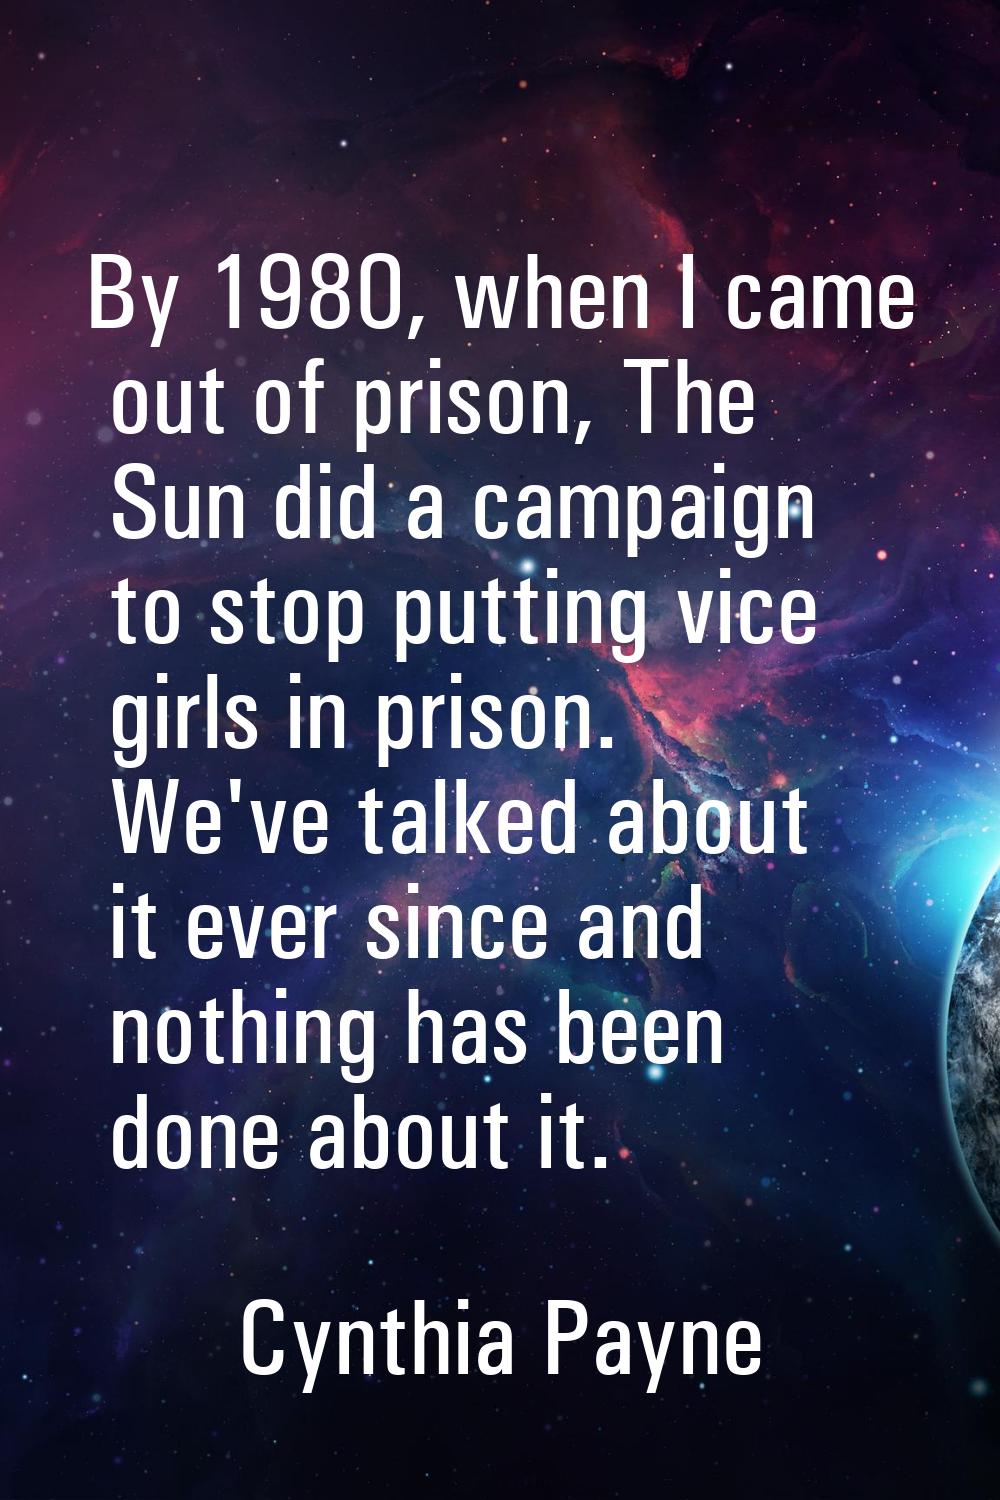 By 1980, when I came out of prison, The Sun did a campaign to stop putting vice girls in prison. We